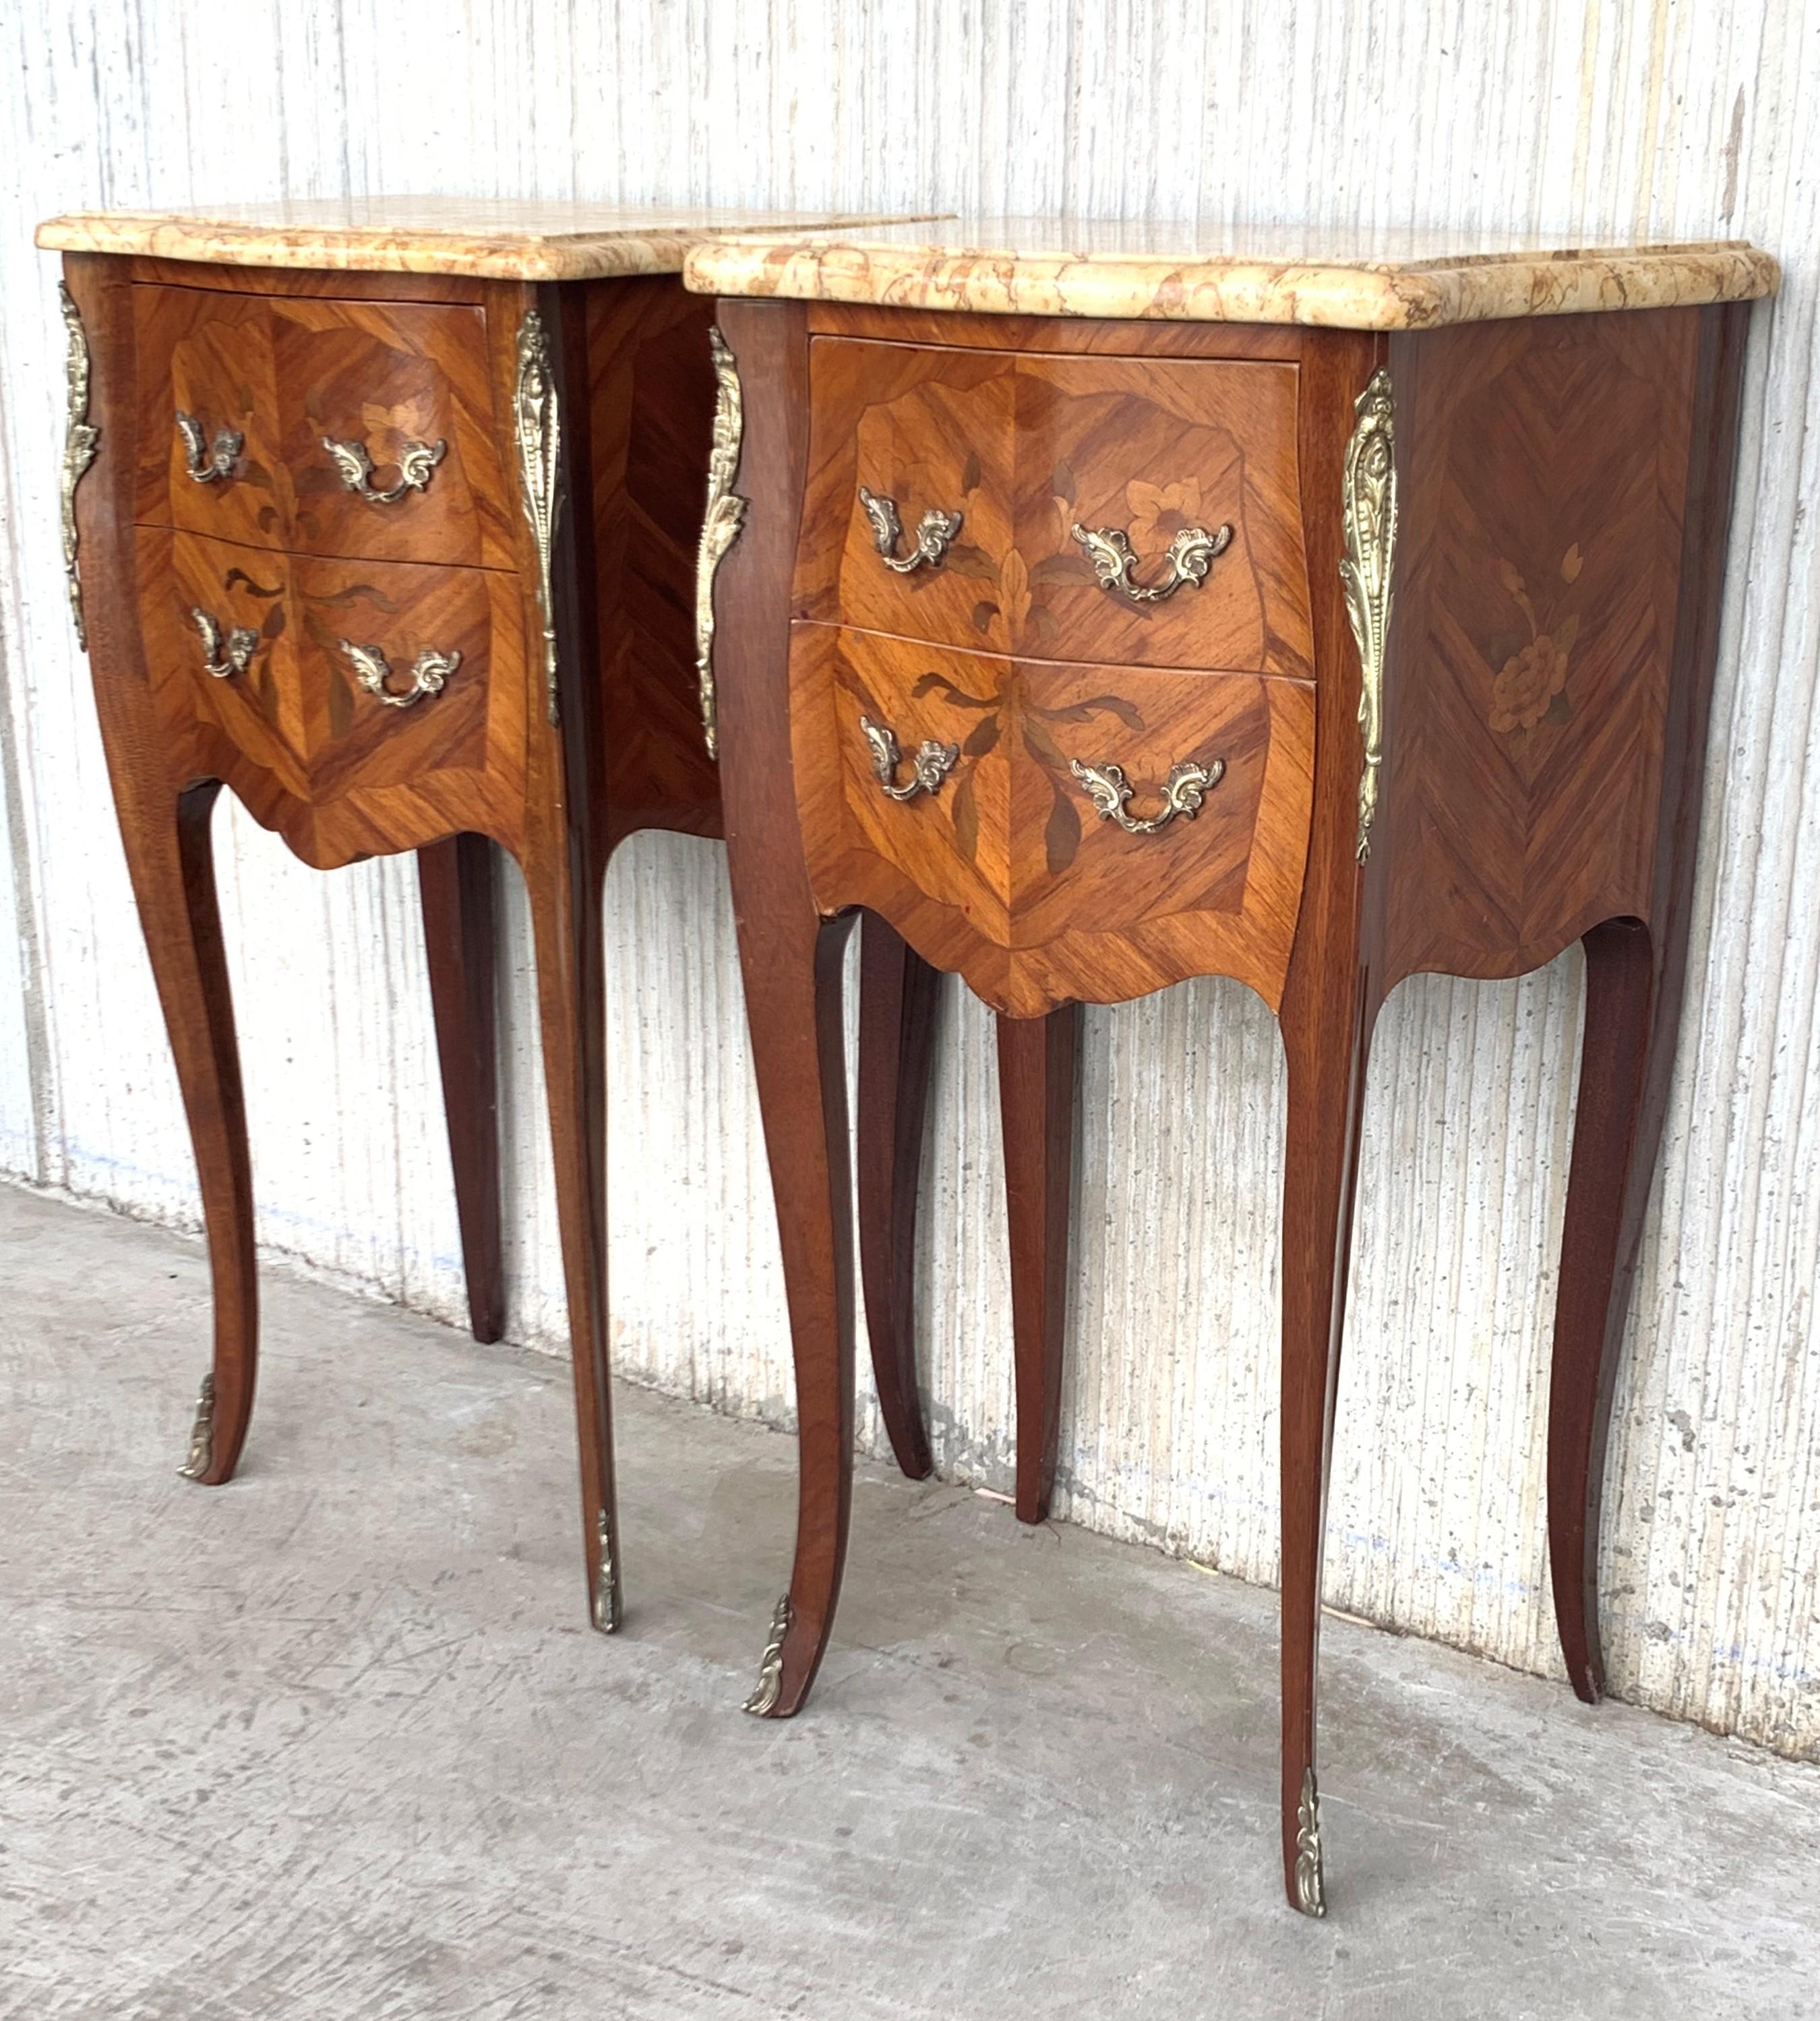 19th Lovely Pair of French Marquetry Nightstands with Roses and Marble Tops
Pair of beautiful French marquetry marble-top commode nightstands with bronze ormolu mounts and original beautifully veined contoured and beveled marble tops. Fine veneering